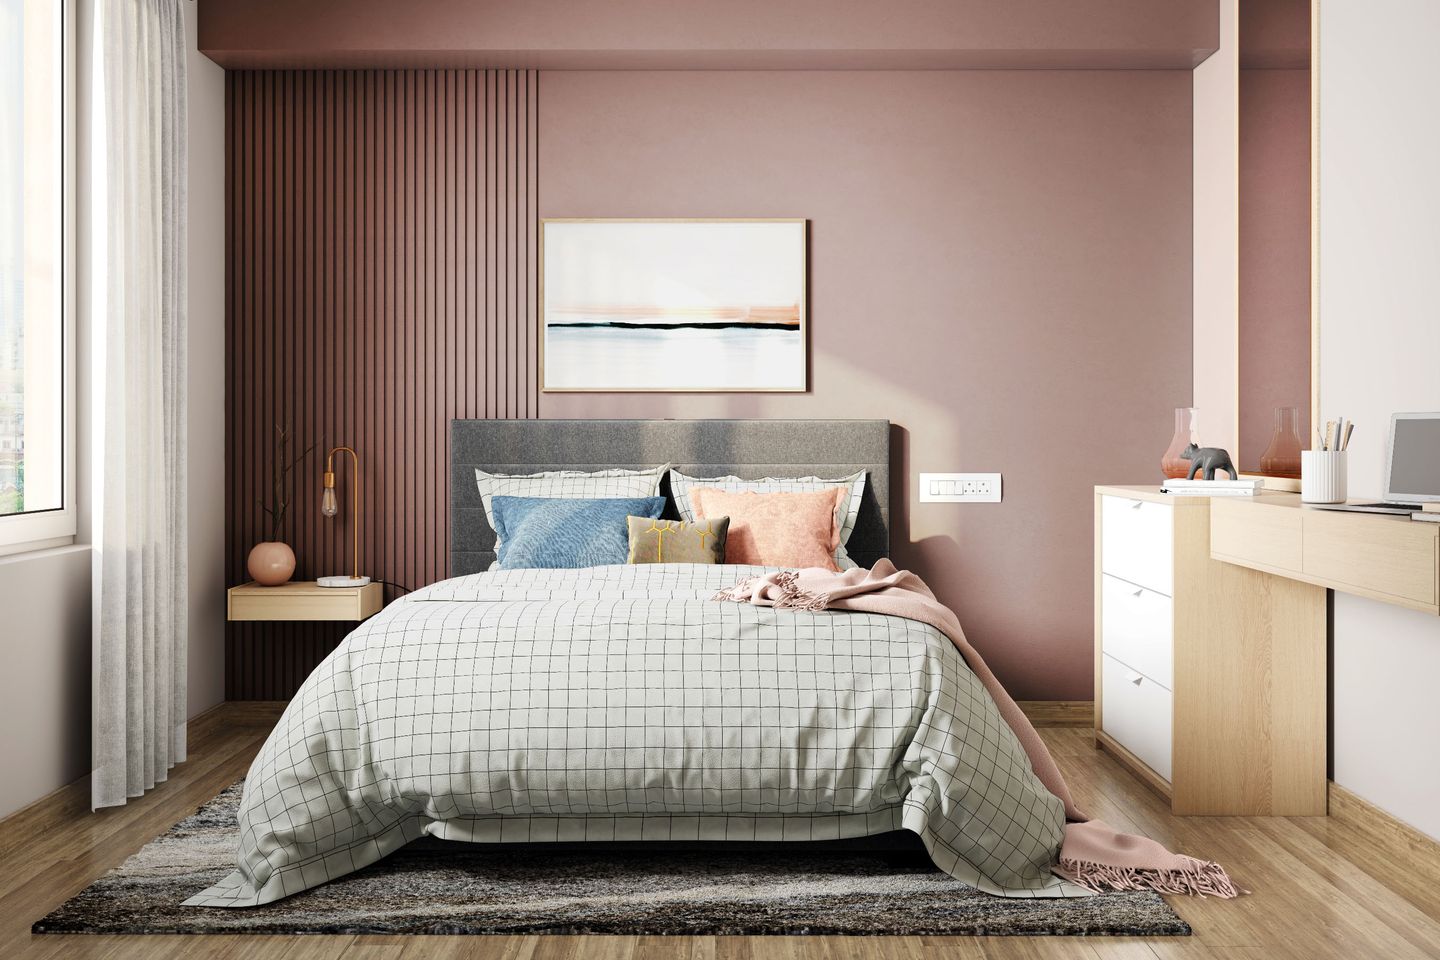 Dusty Pink Bedroom Wall Paint Design With Modern Aesthetics | Livspace